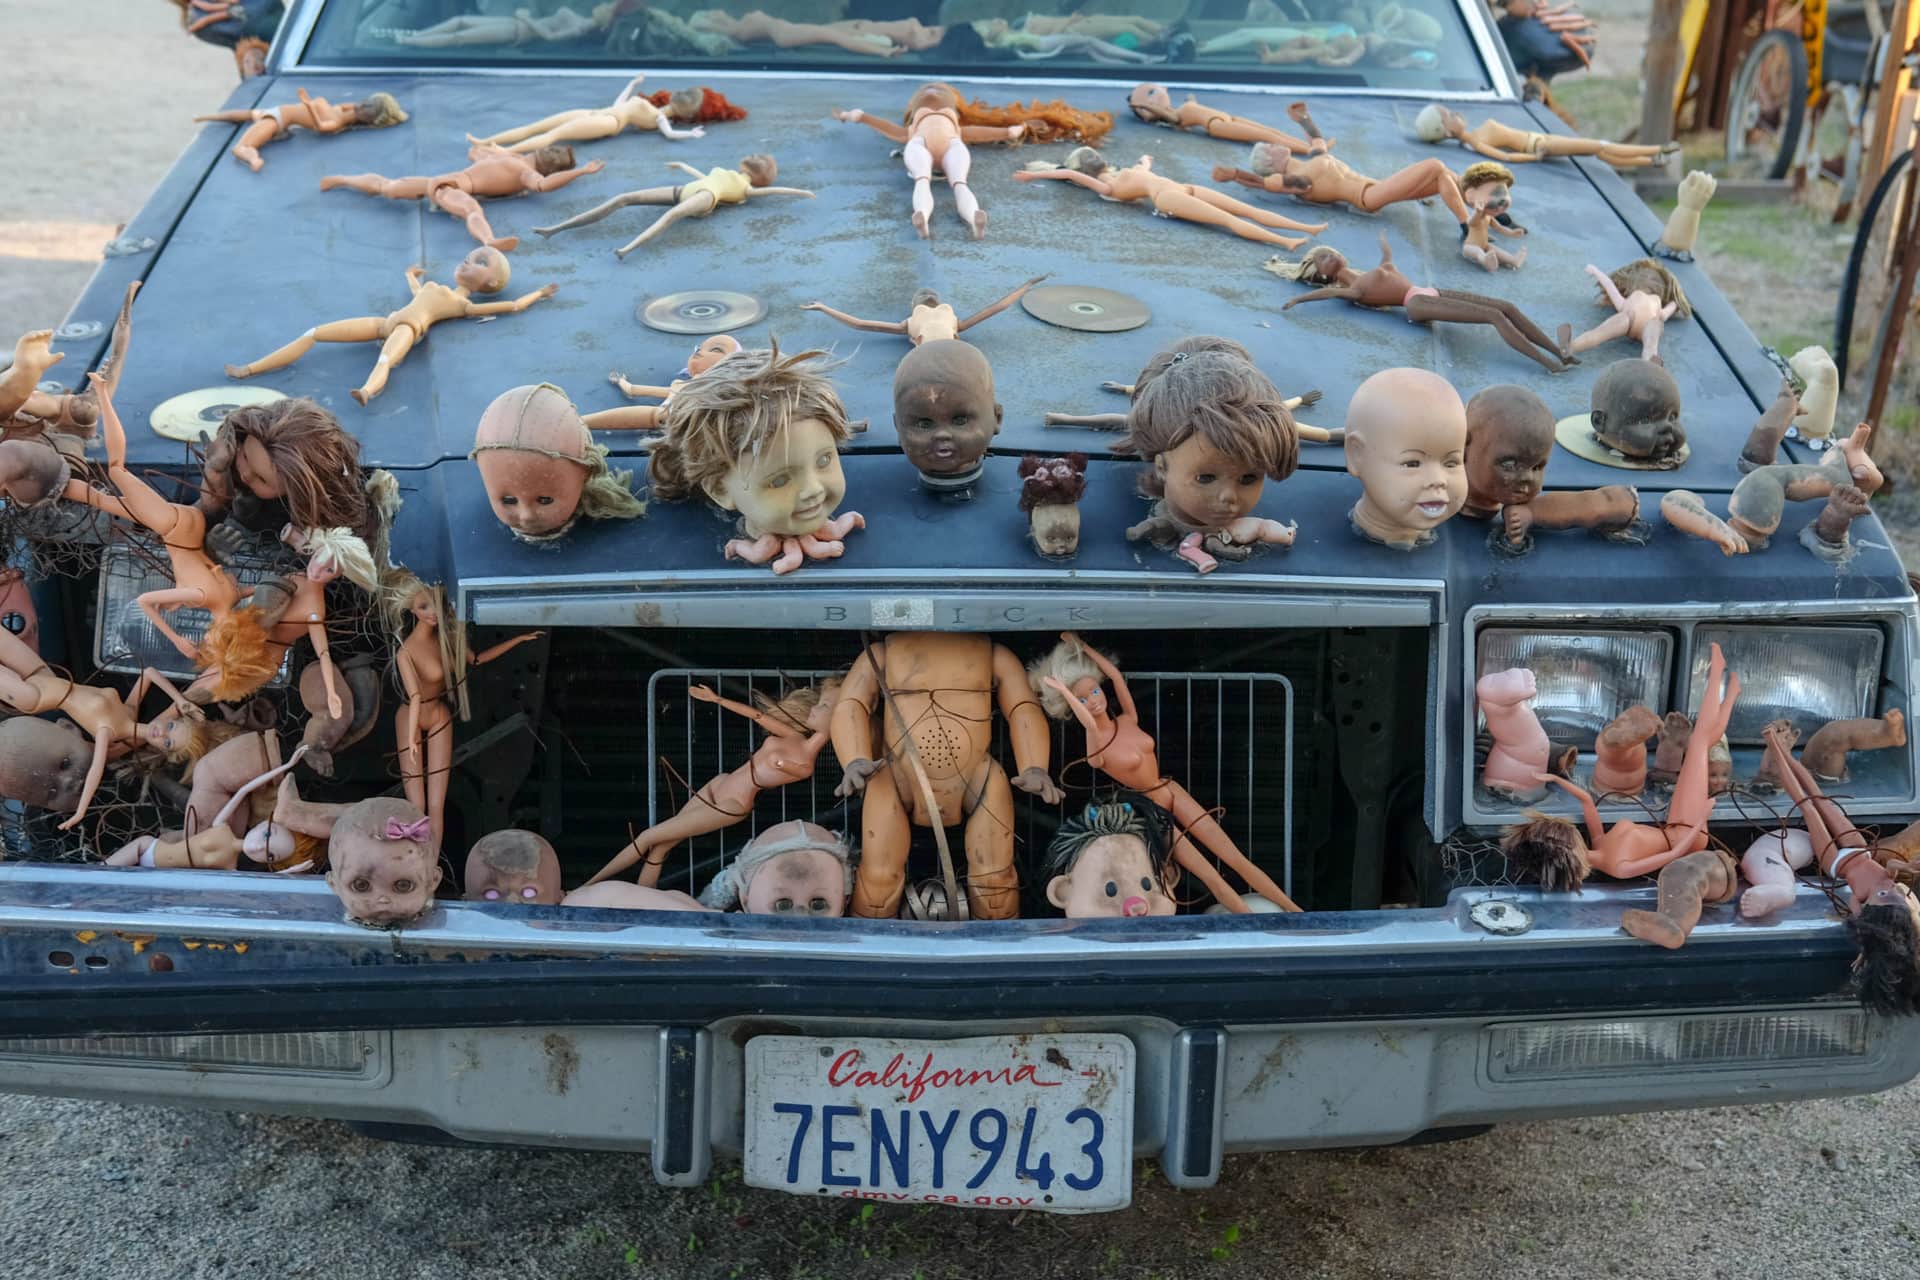 A car covered with baby dolls heads is one quirky art piece in East Jesus's outdoor "museum."